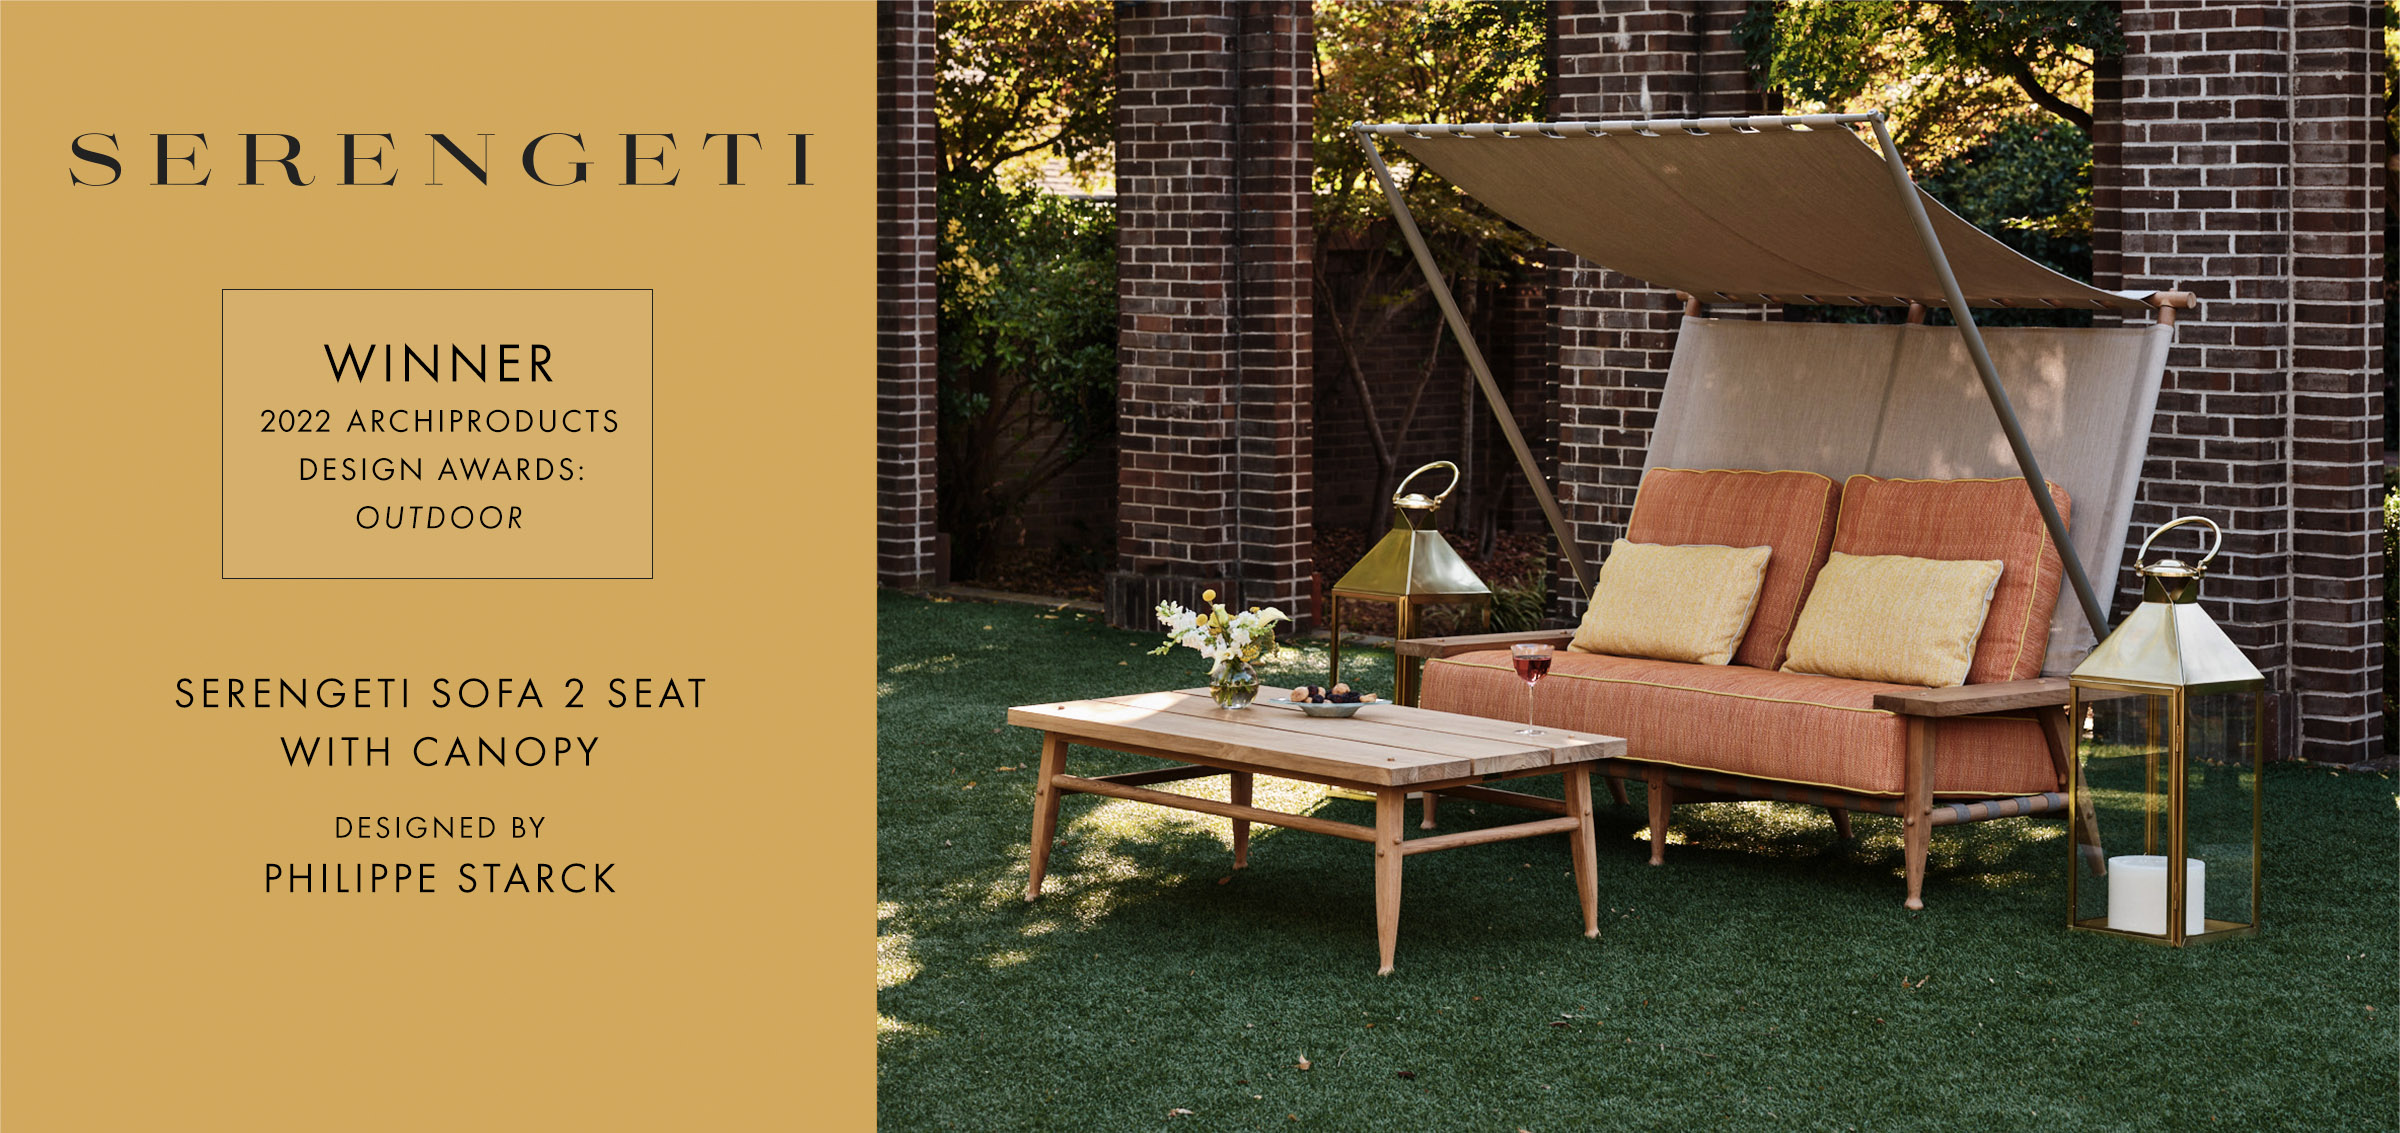 CLICK TO EXPLORE THE AWARD-WINNING SERENGETI COLLECTION